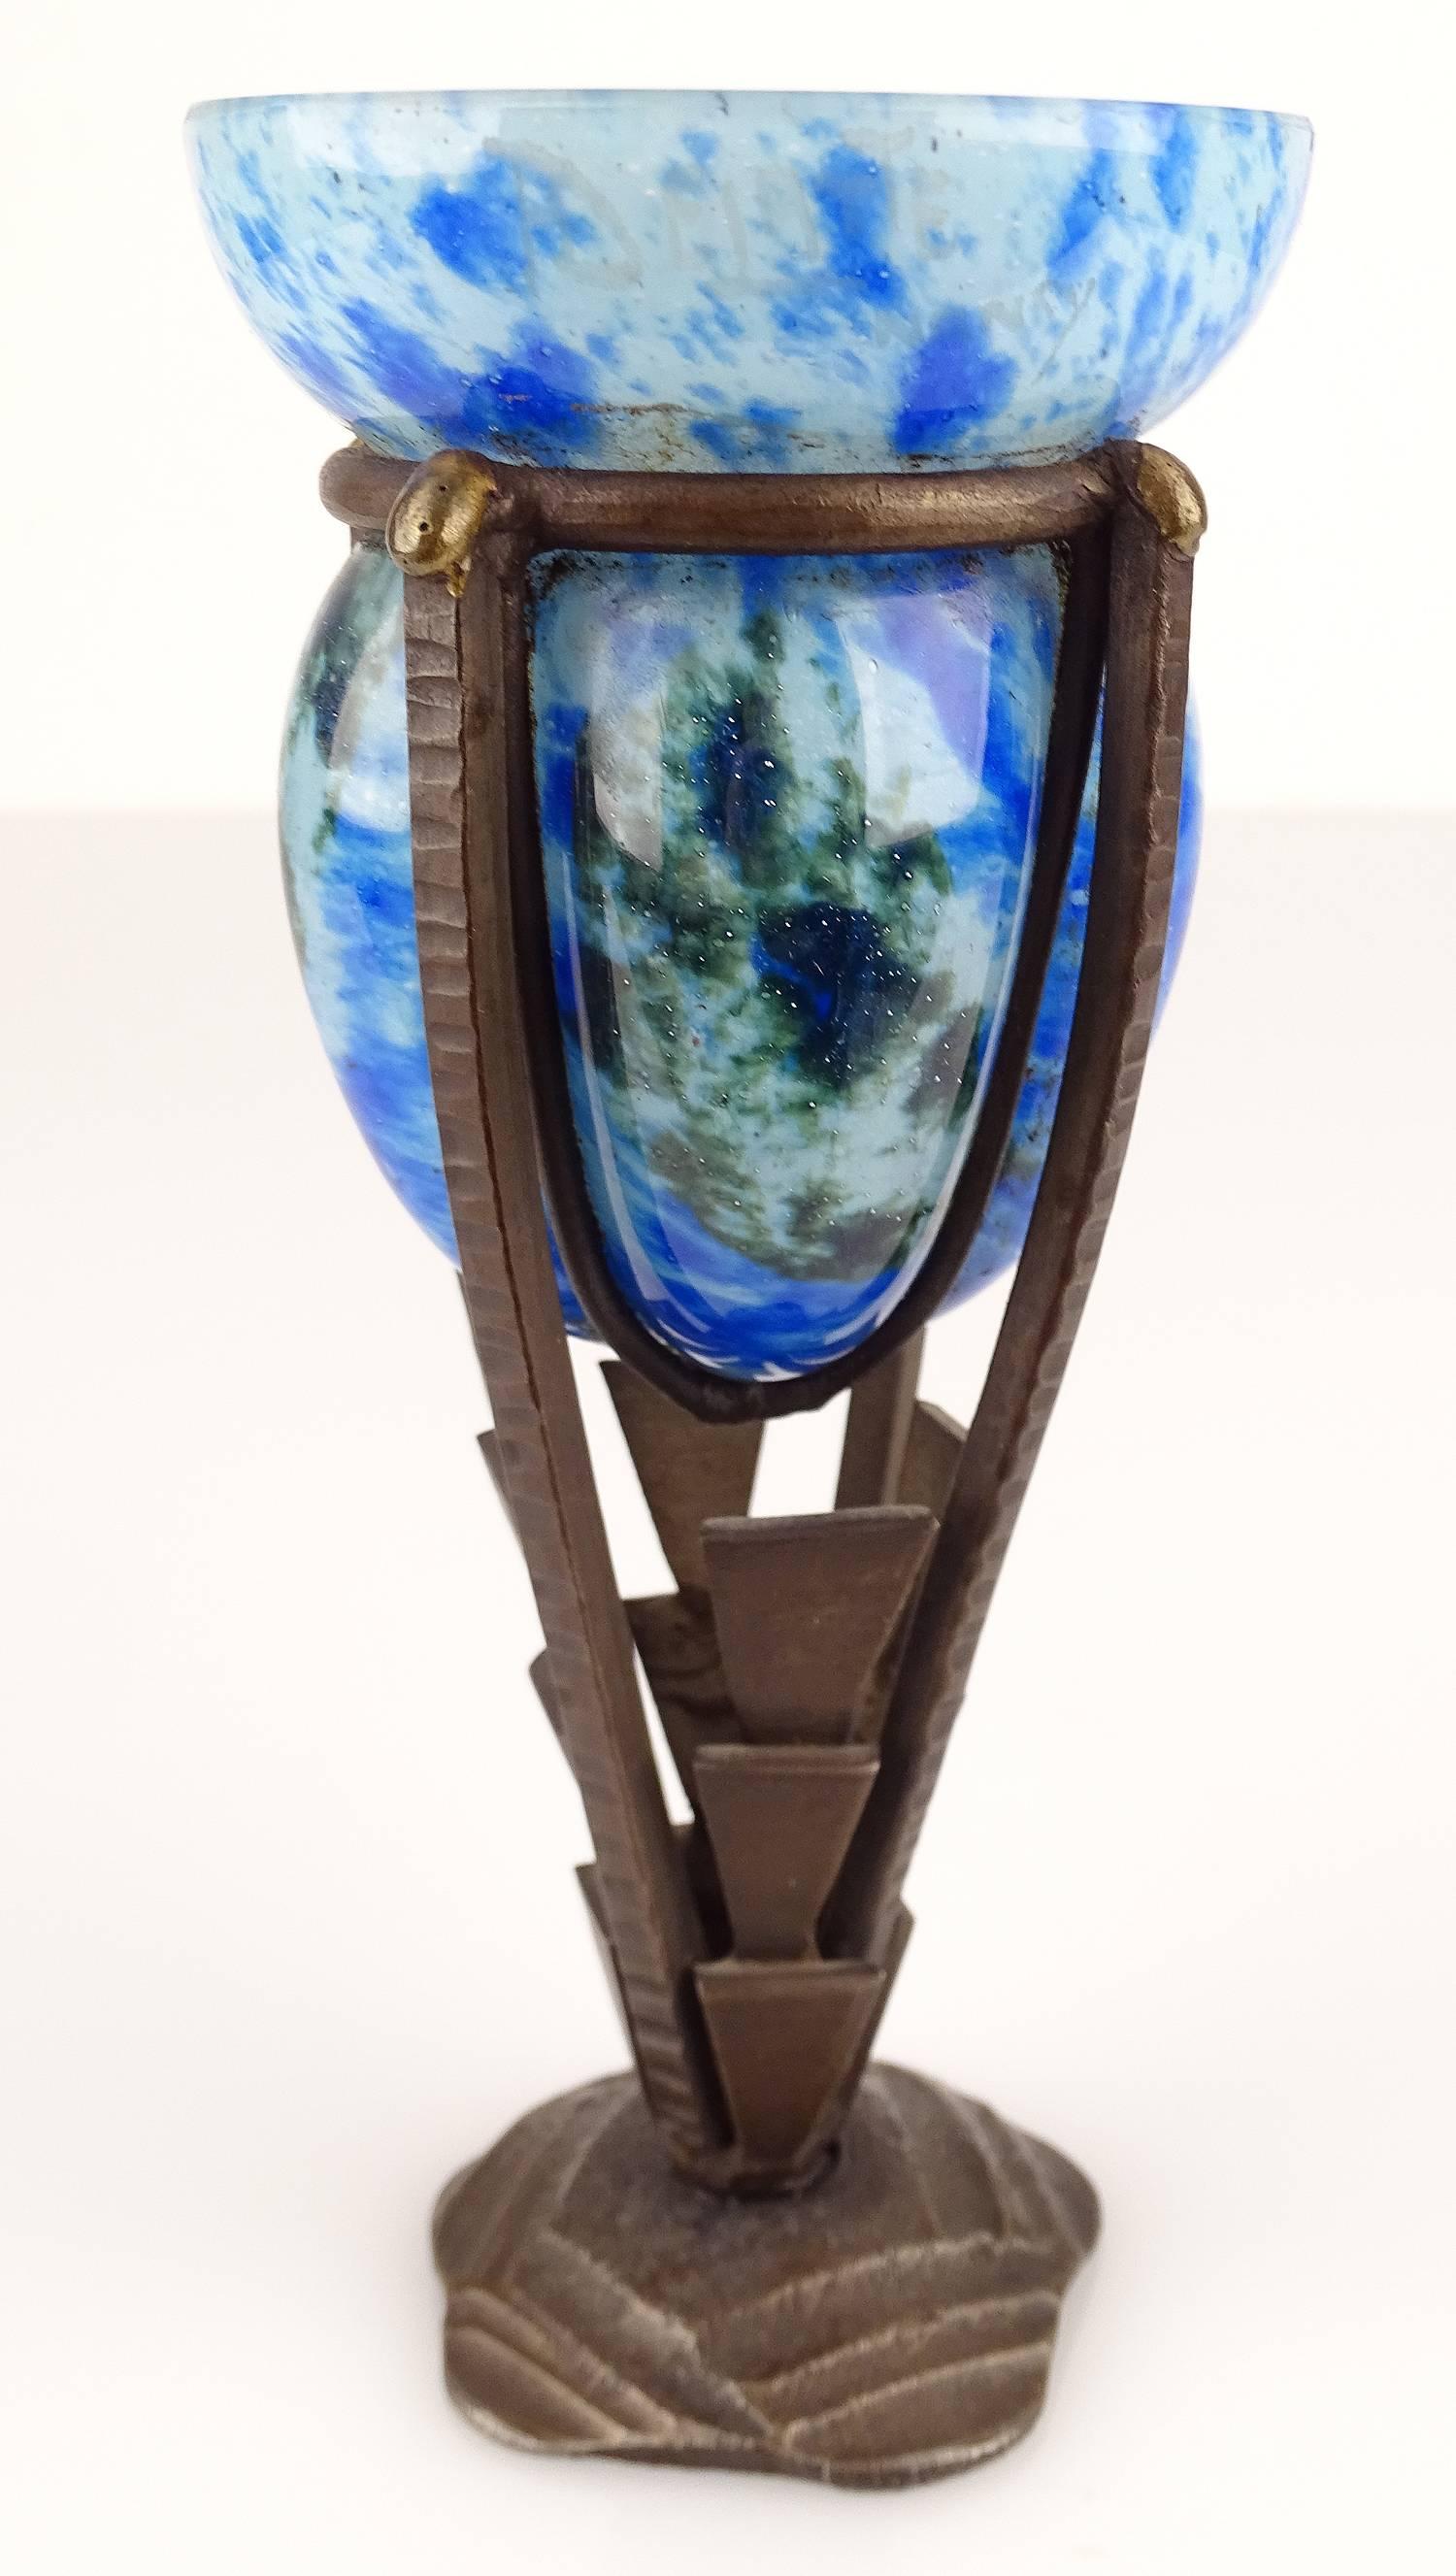 French Art Deco glass vase by Andre  Delatte (Jarville, Nancy) and E. VAL (Ancienne Maison Effler 218, rue du Faubourg Saint-Martin (Paris), France, circa 1925, green and blue blown glass with silver inclusions, signed with Delatte in glass (wheel